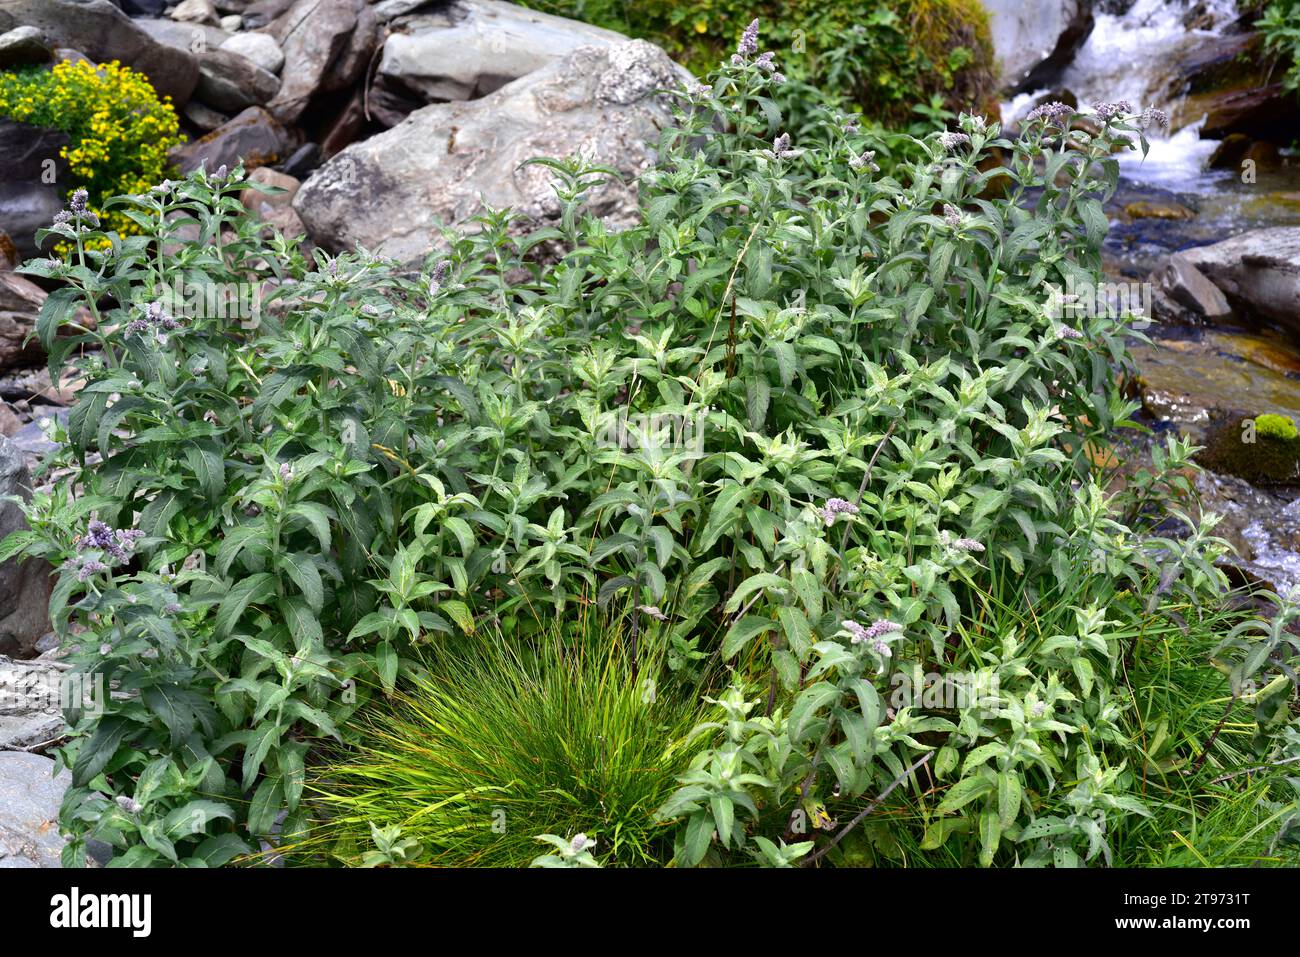 Horse mint (Mentha longifolia) is a perennial herb native to Europe, Africa and Asia. This photo was taken in Montgarri, Pallars Sobira, Lleida Pyrene Stock Photo